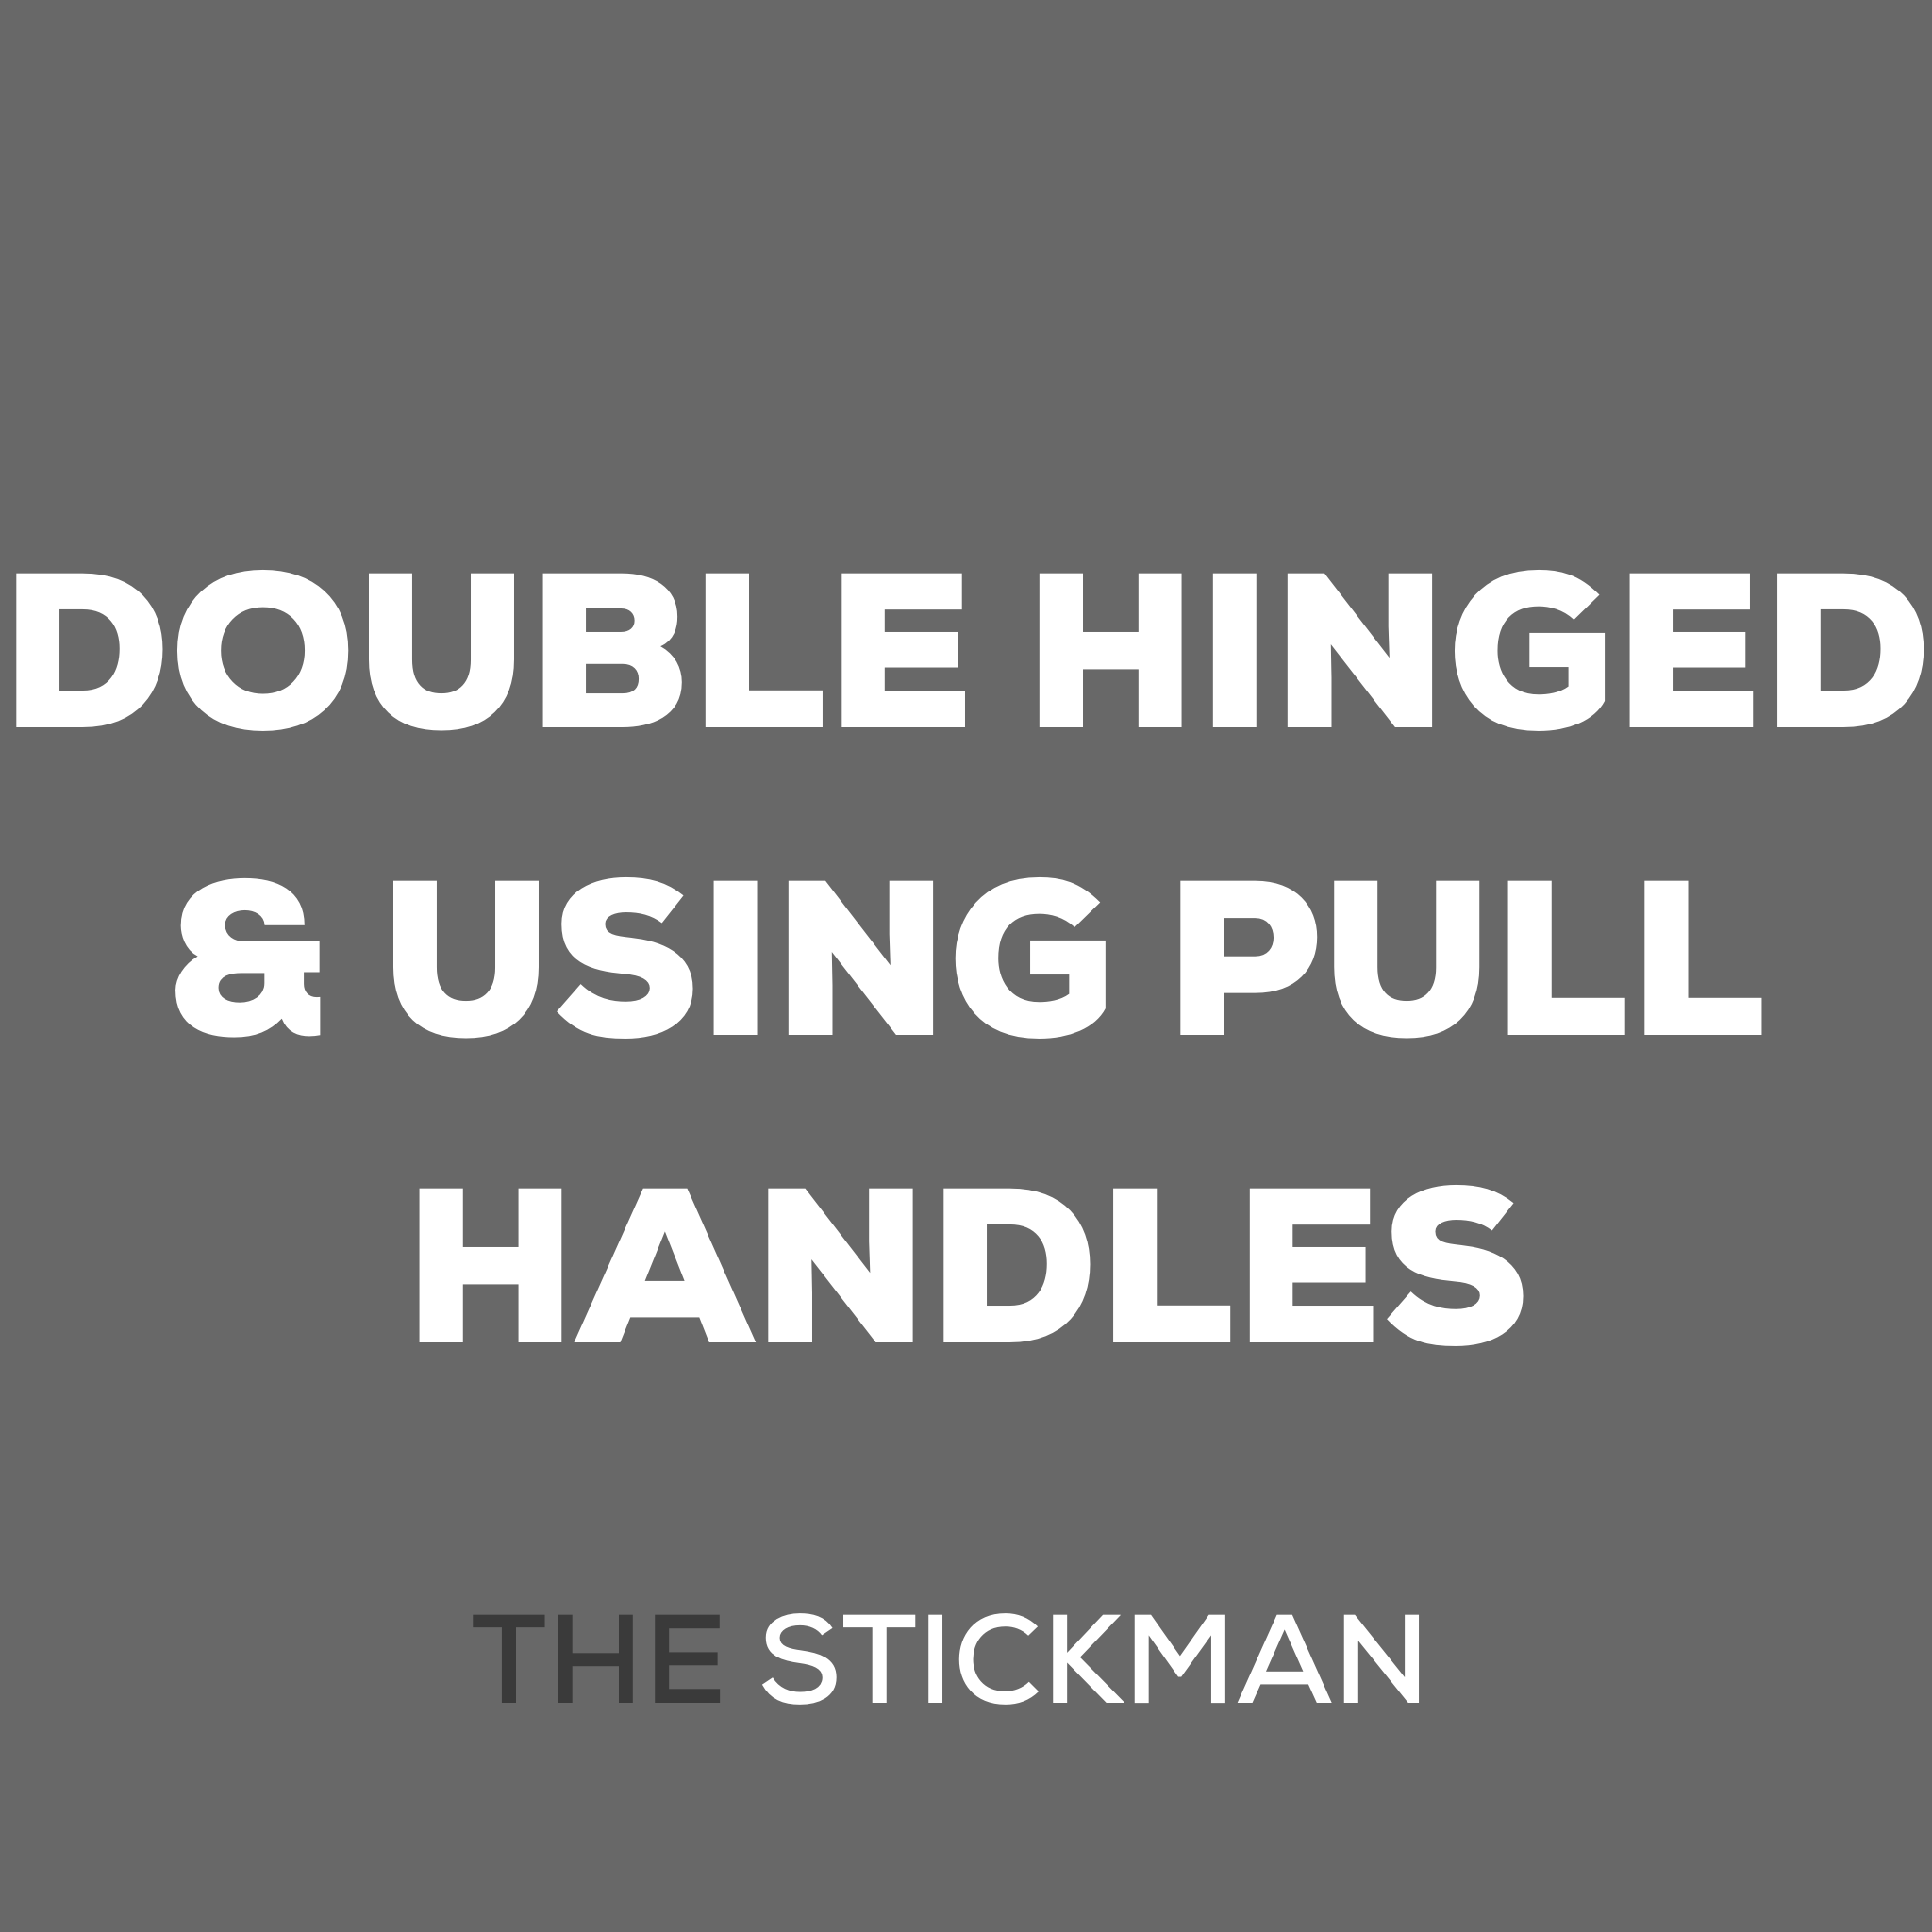 DOUBLE HINGED & USING PULL HANDLES